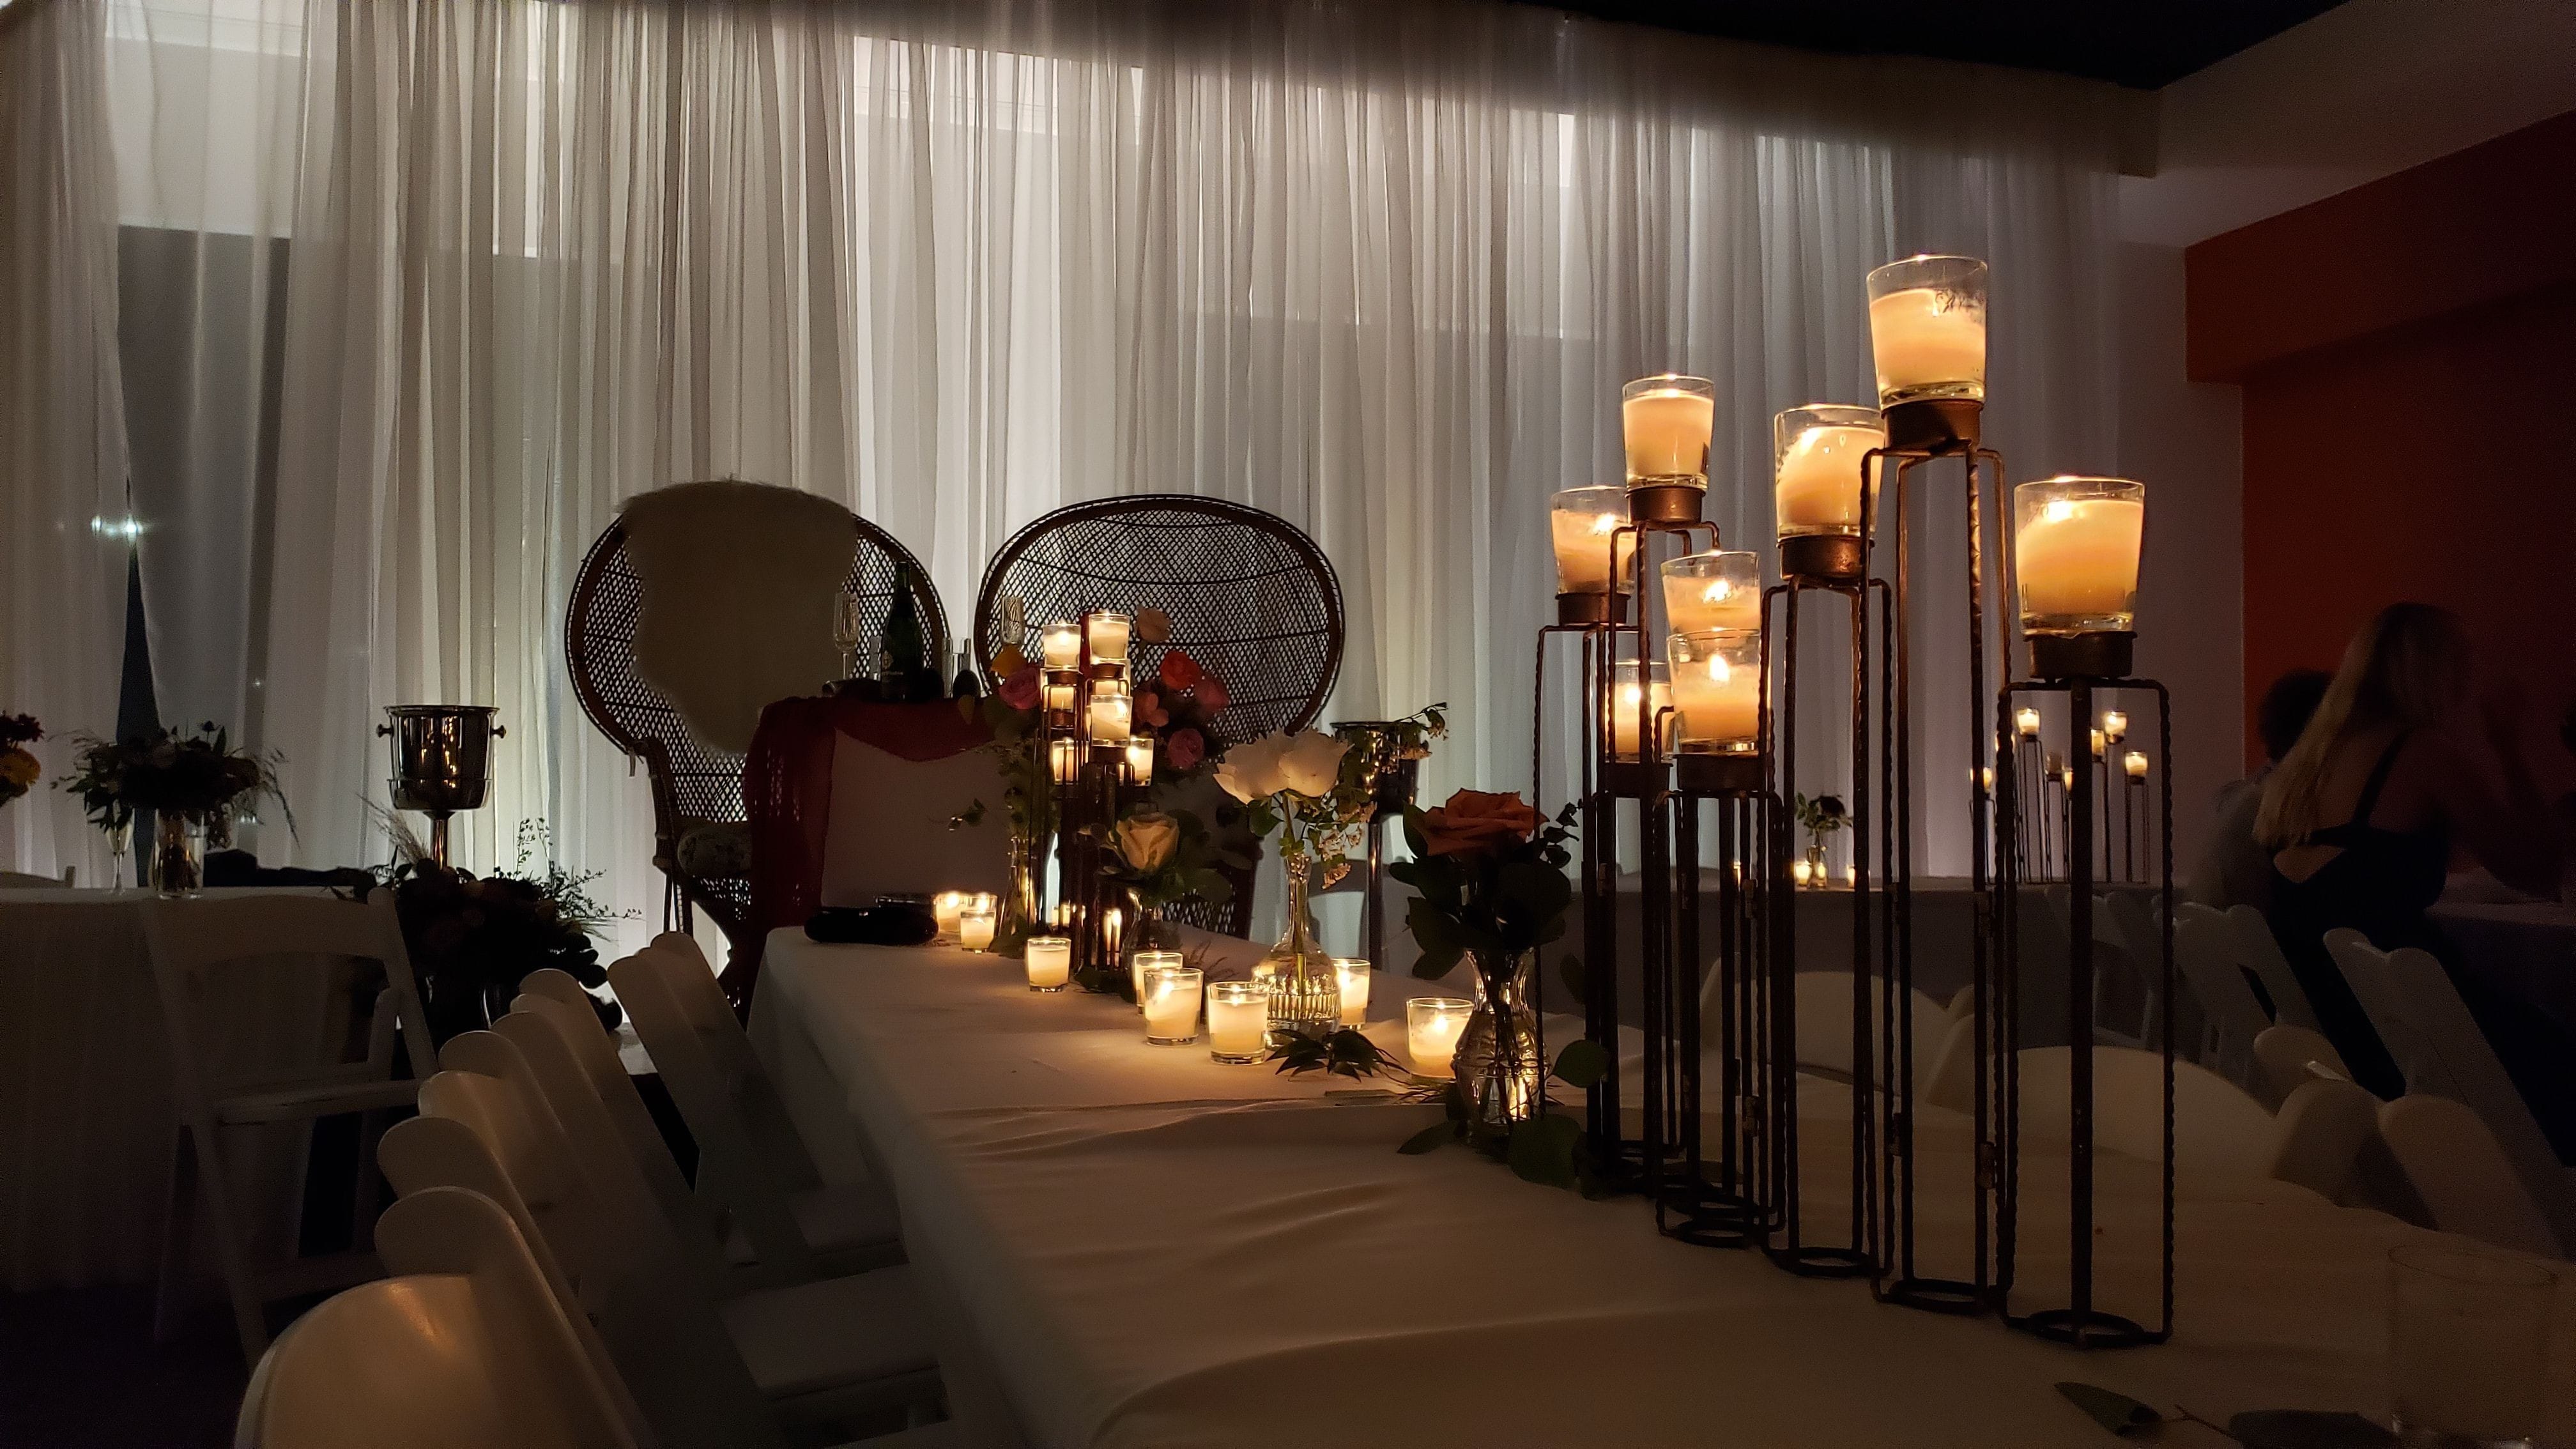 Pipe and drape lighting behind a sweetheart table for a wedding at Pier B.